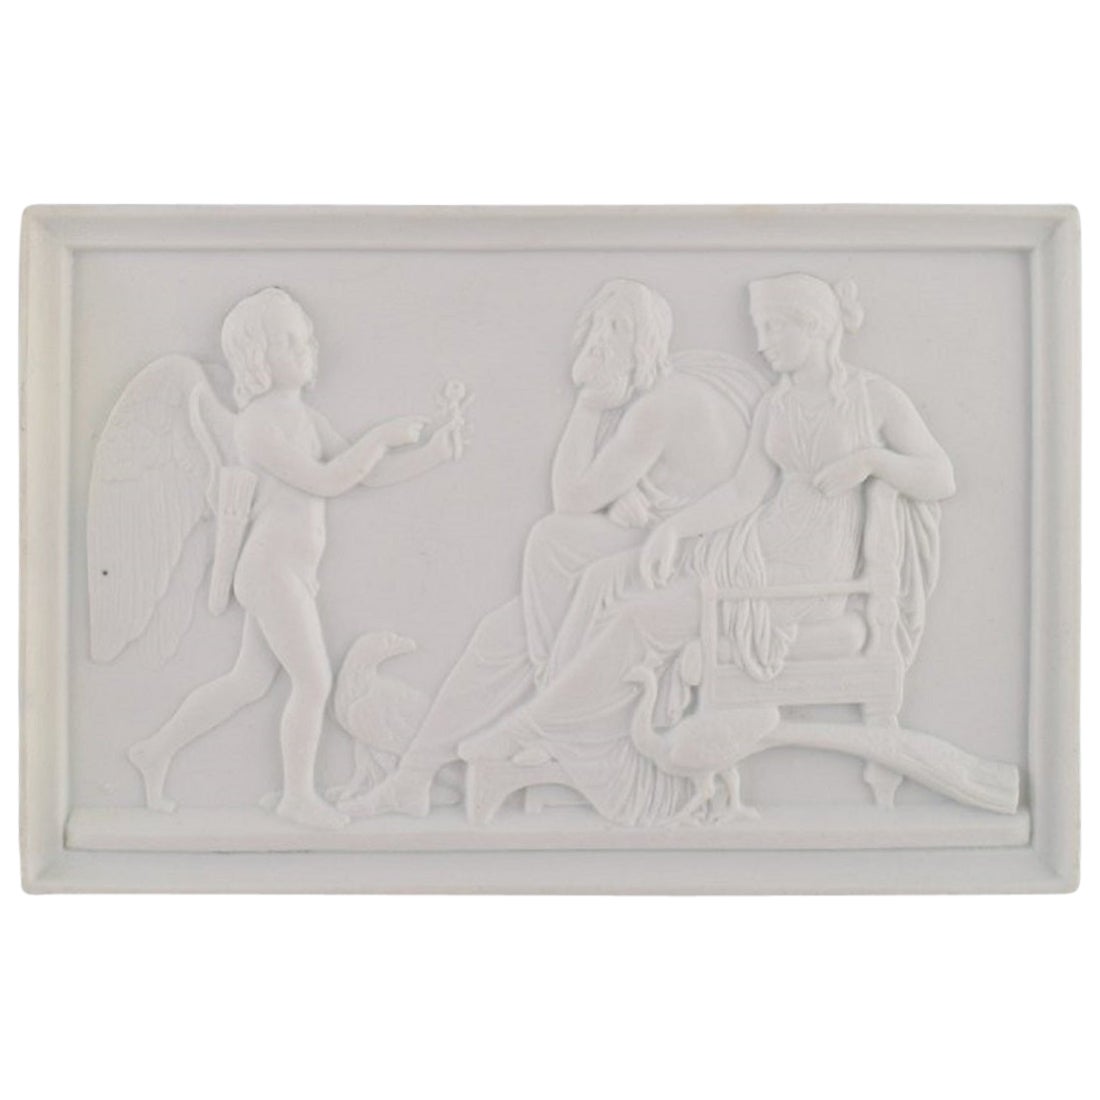 Bing and Grøndahl after Thorvaldsen, Antique Biscuit Wall Plaque, 1870s / 80s